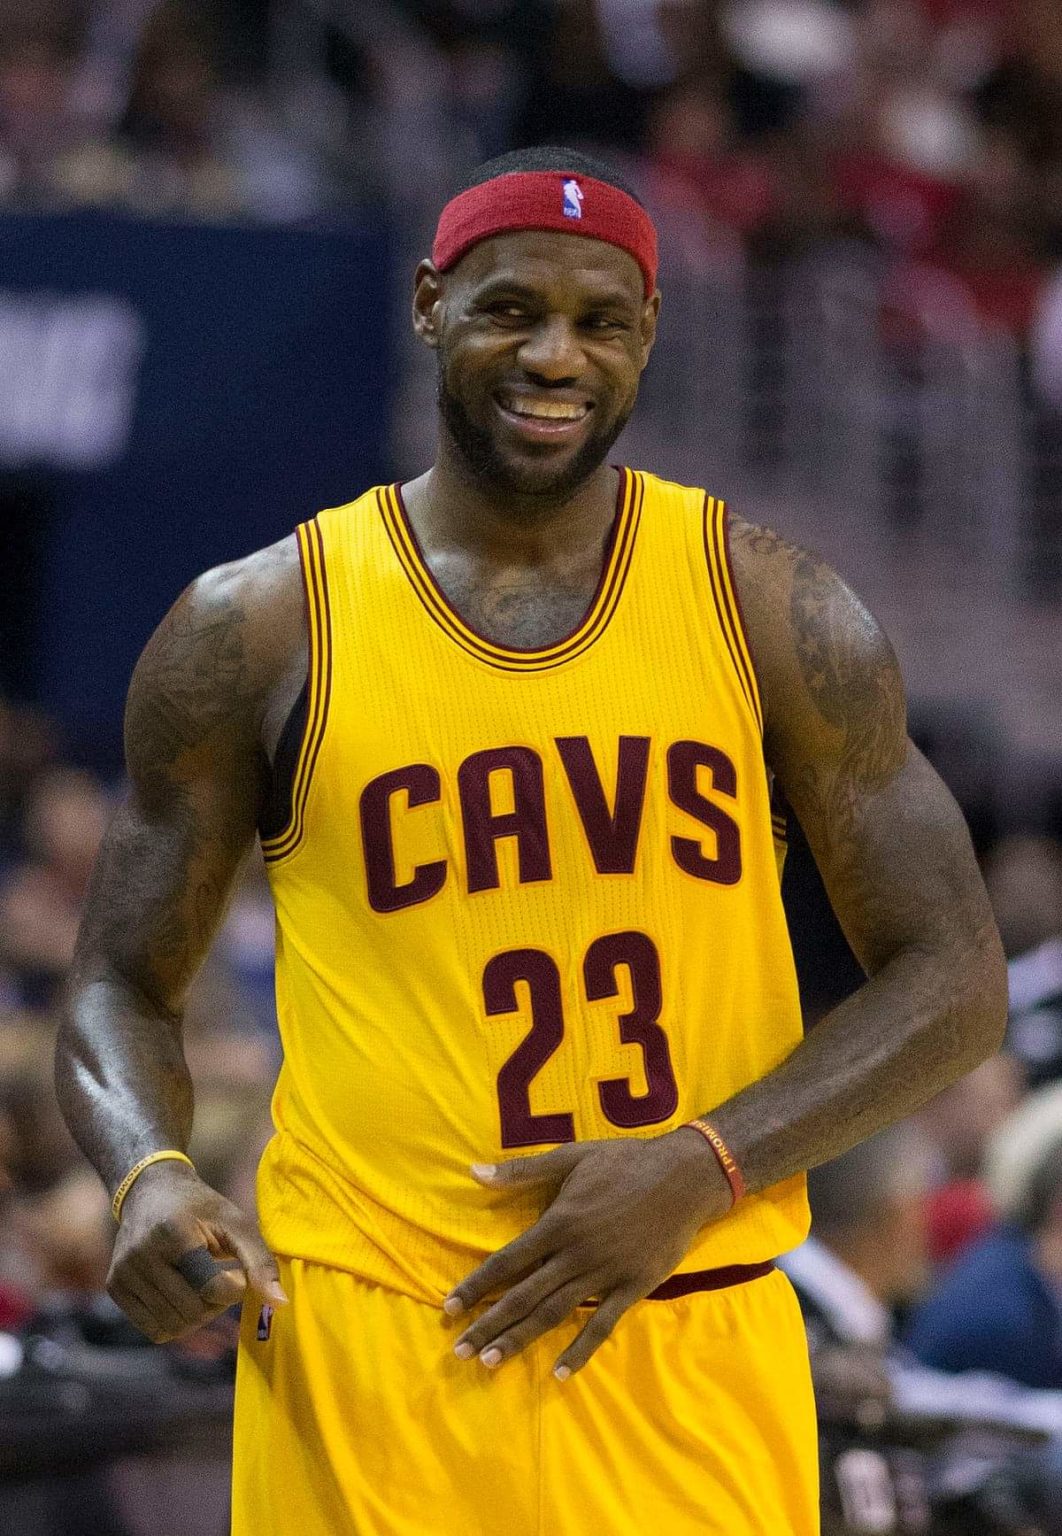 Lebron James Is More Than An Athlete-He Won’t Shut Up And Dribble ...